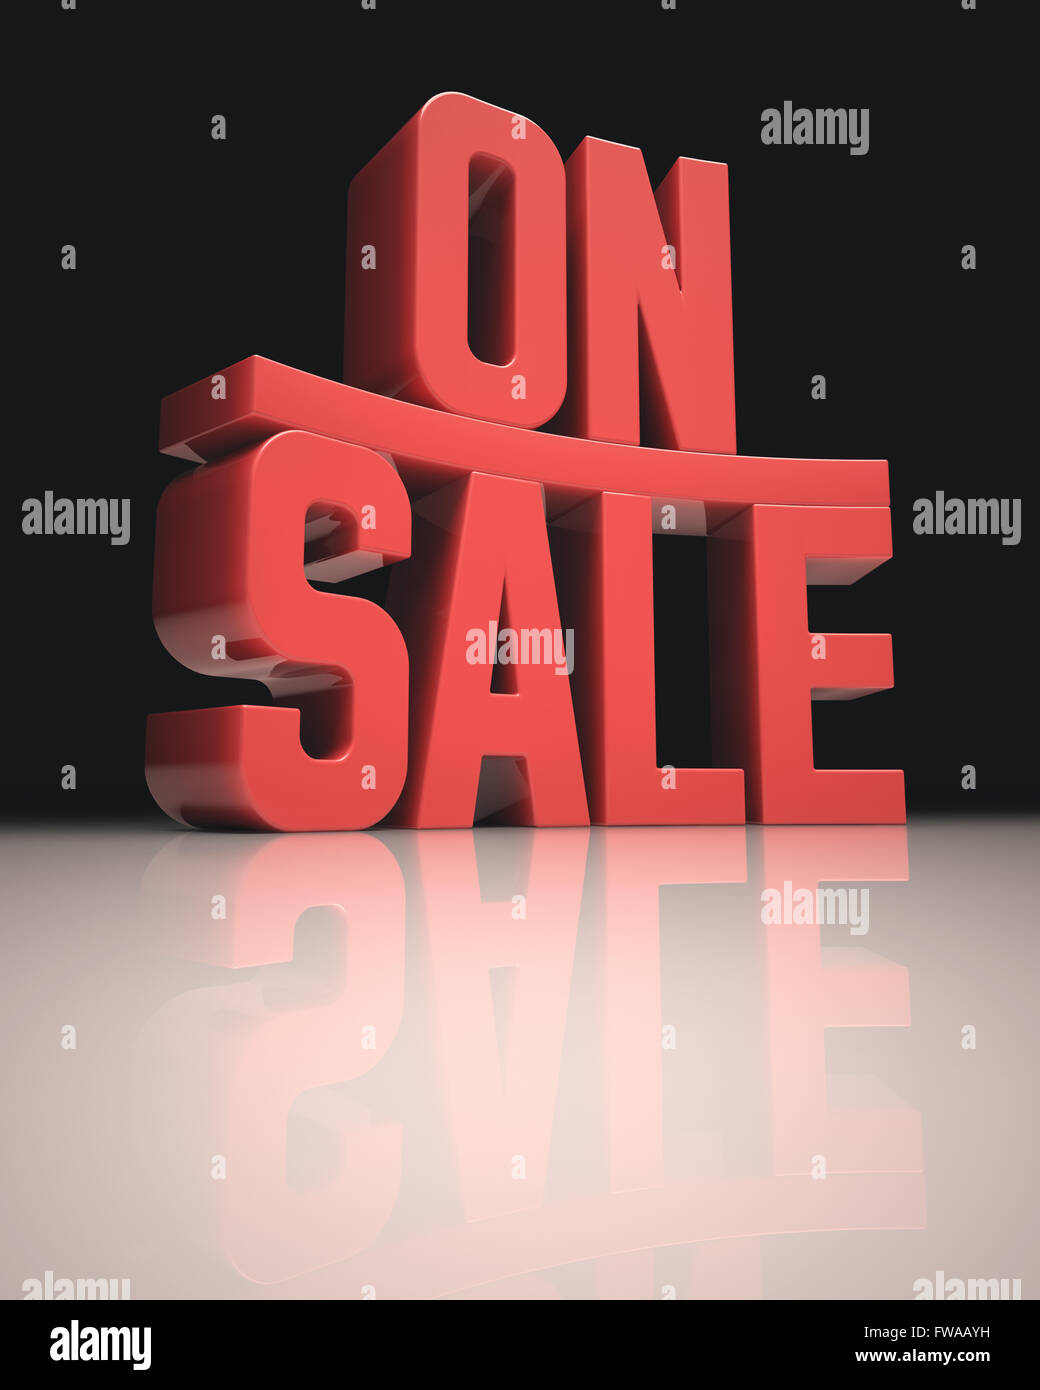 3D image concept. 'On Sale' words in red on white surface. Clipping path included. Stock Photo